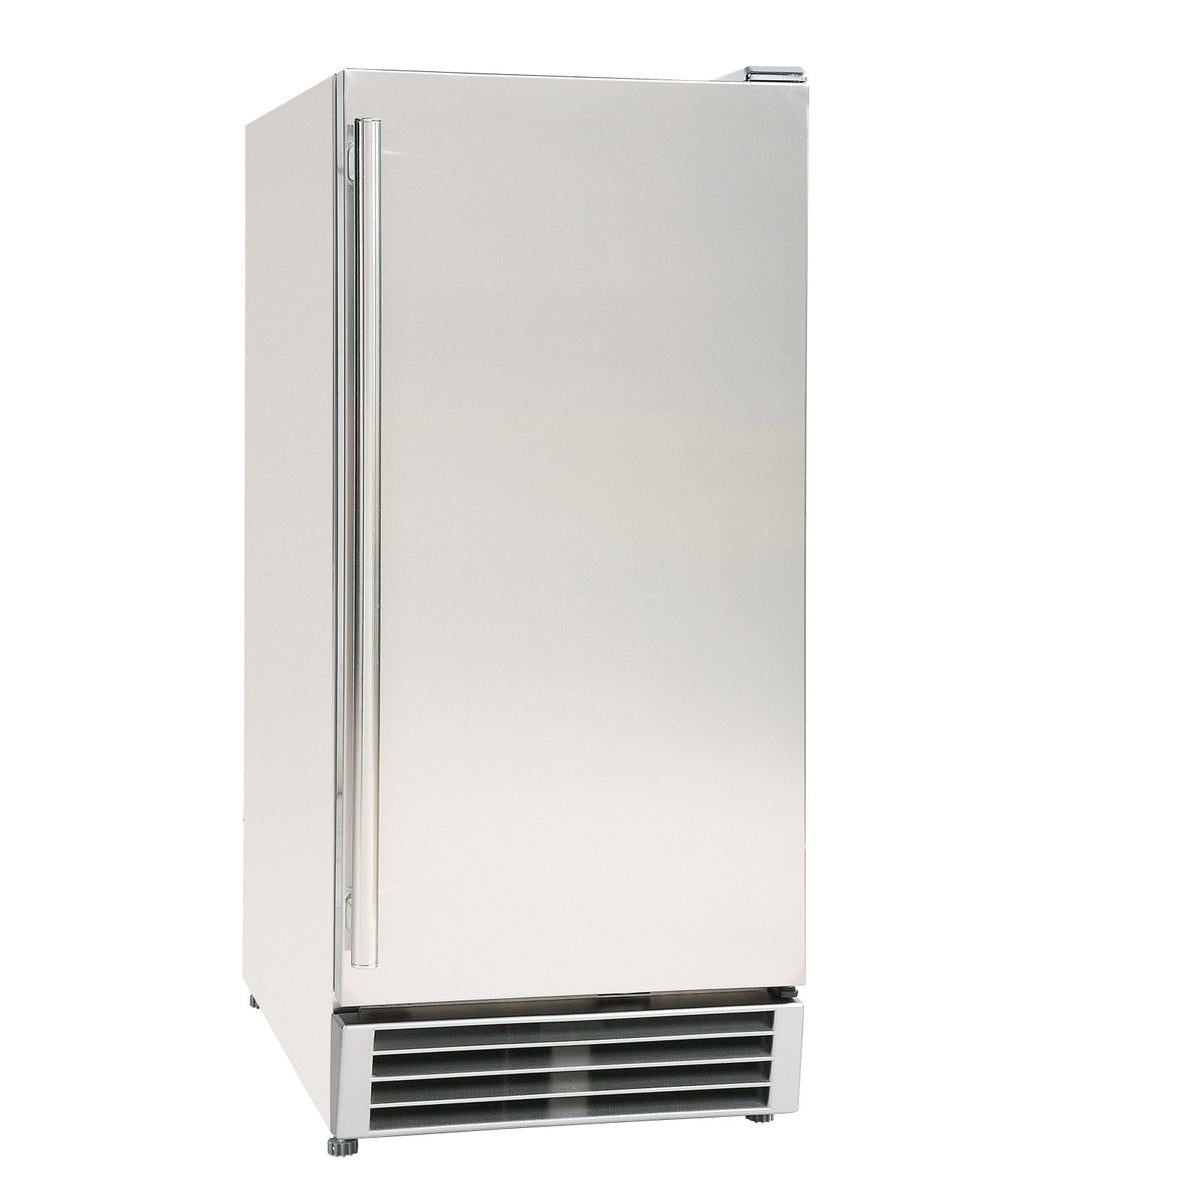 Maxx Ice MCR3U - O Compact Outdoor Refrigerator, 15"W, 3 cu. ft. Capacity, in Stainless Steel - TheChefStore.Com